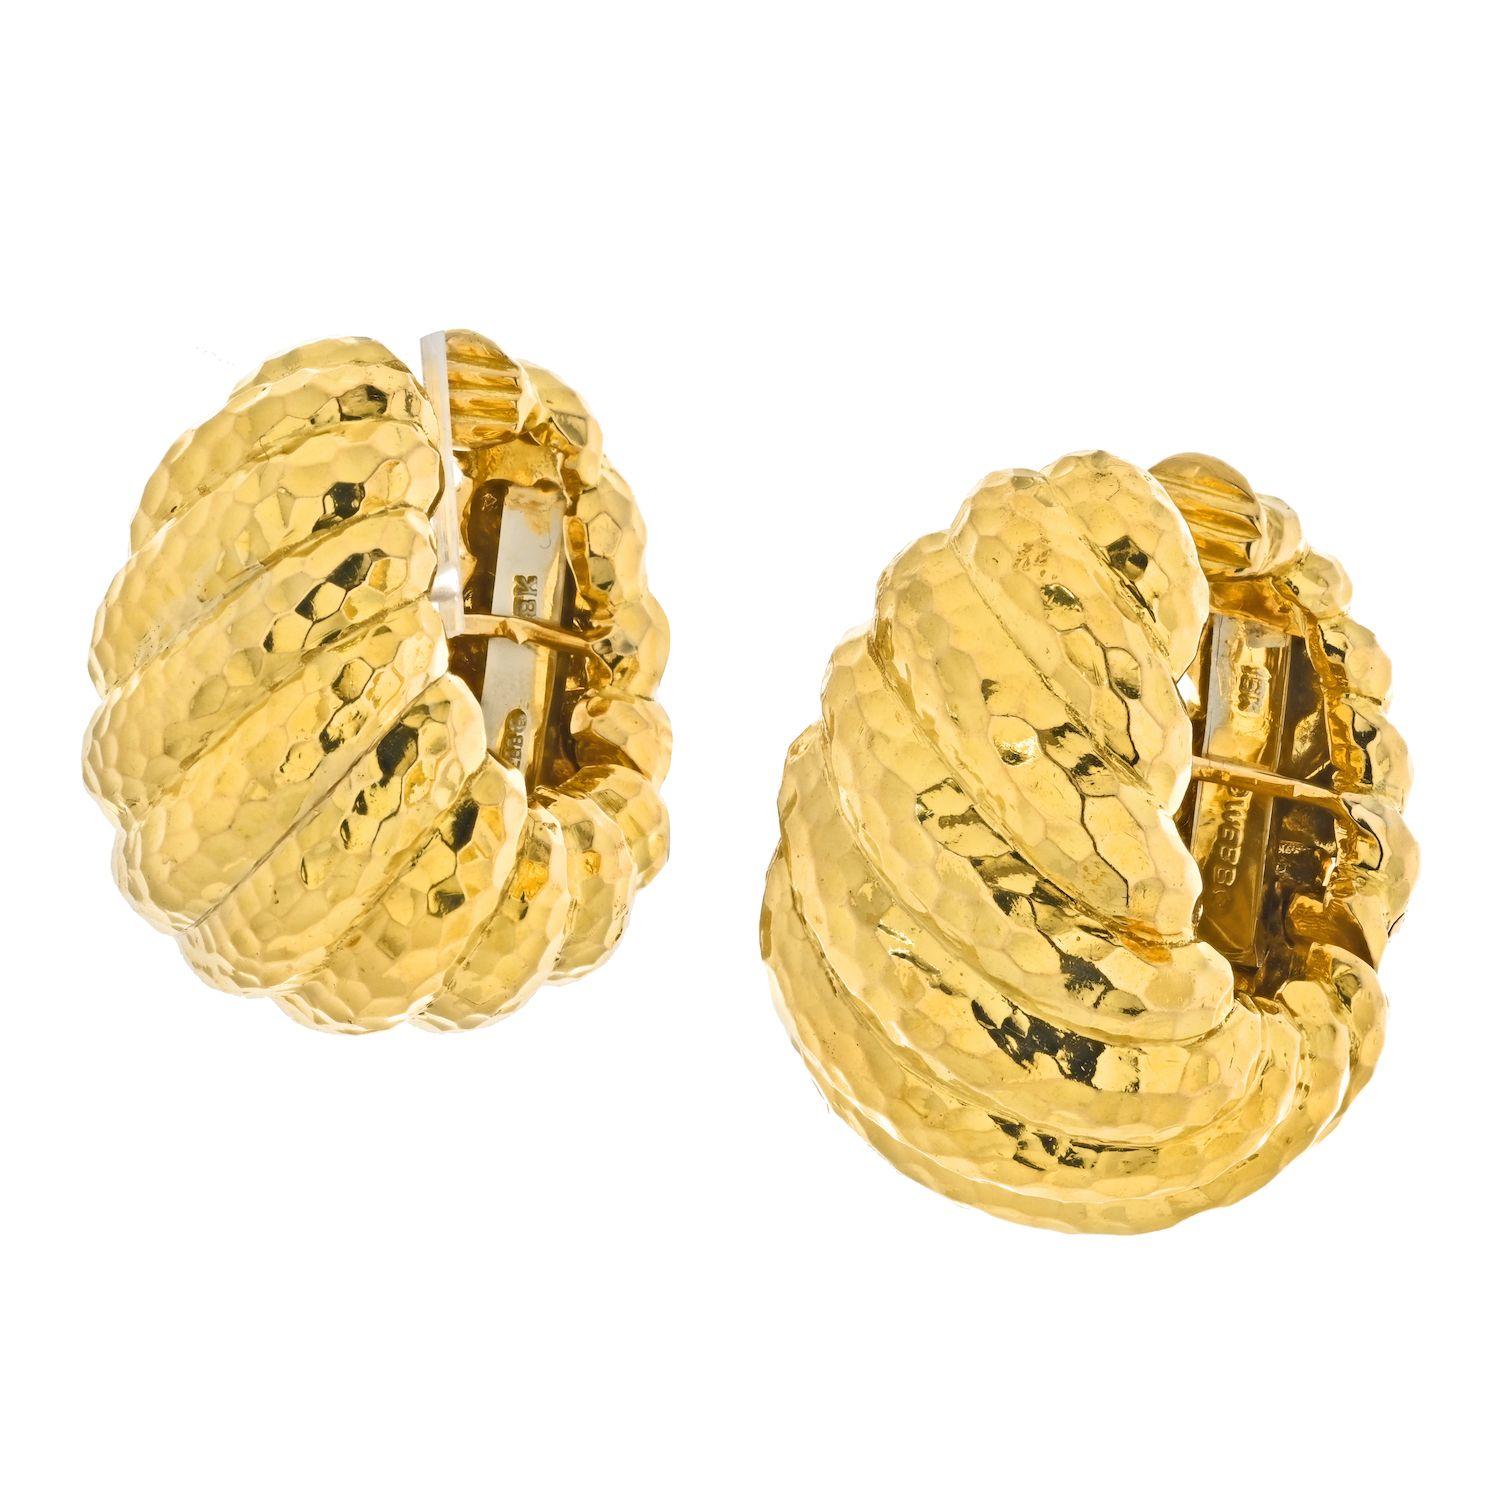 Classic clip on earrings by David Webb designed as a jumbo clip on shrimp style earring.
Bold and articulated Bombe Ribbed Shrip earrings by David Webb. 
18 kt., of slightly tapered hammered bombé ribs, signed Webb.
Clip closure. 
Length: 1 inch